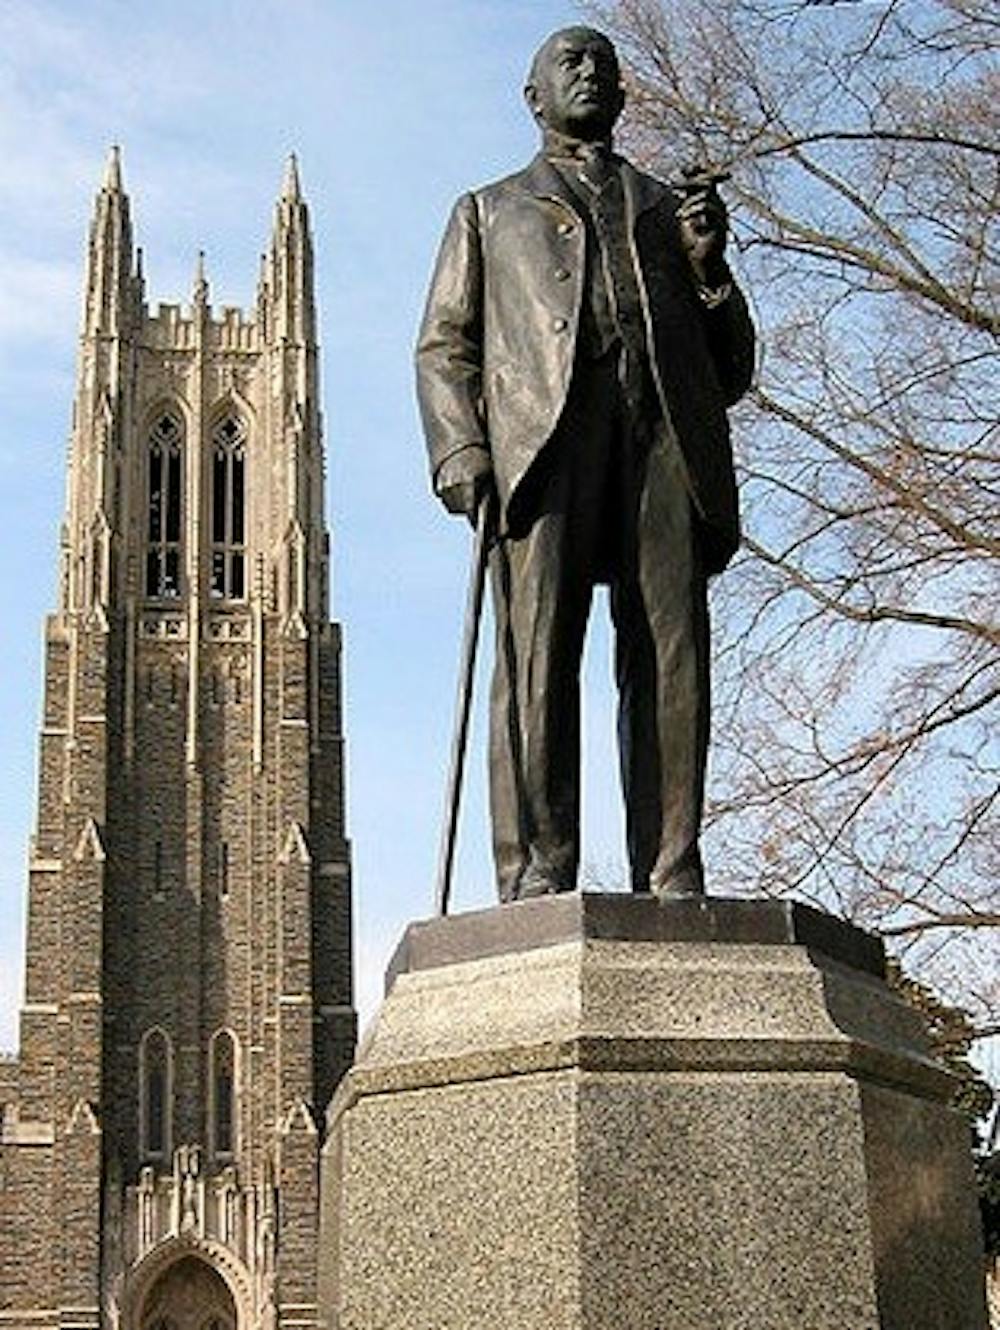 wikimeddia/ cc by-sa 3.0
Duke University’s reputation was temporarily impugned by the scandal.